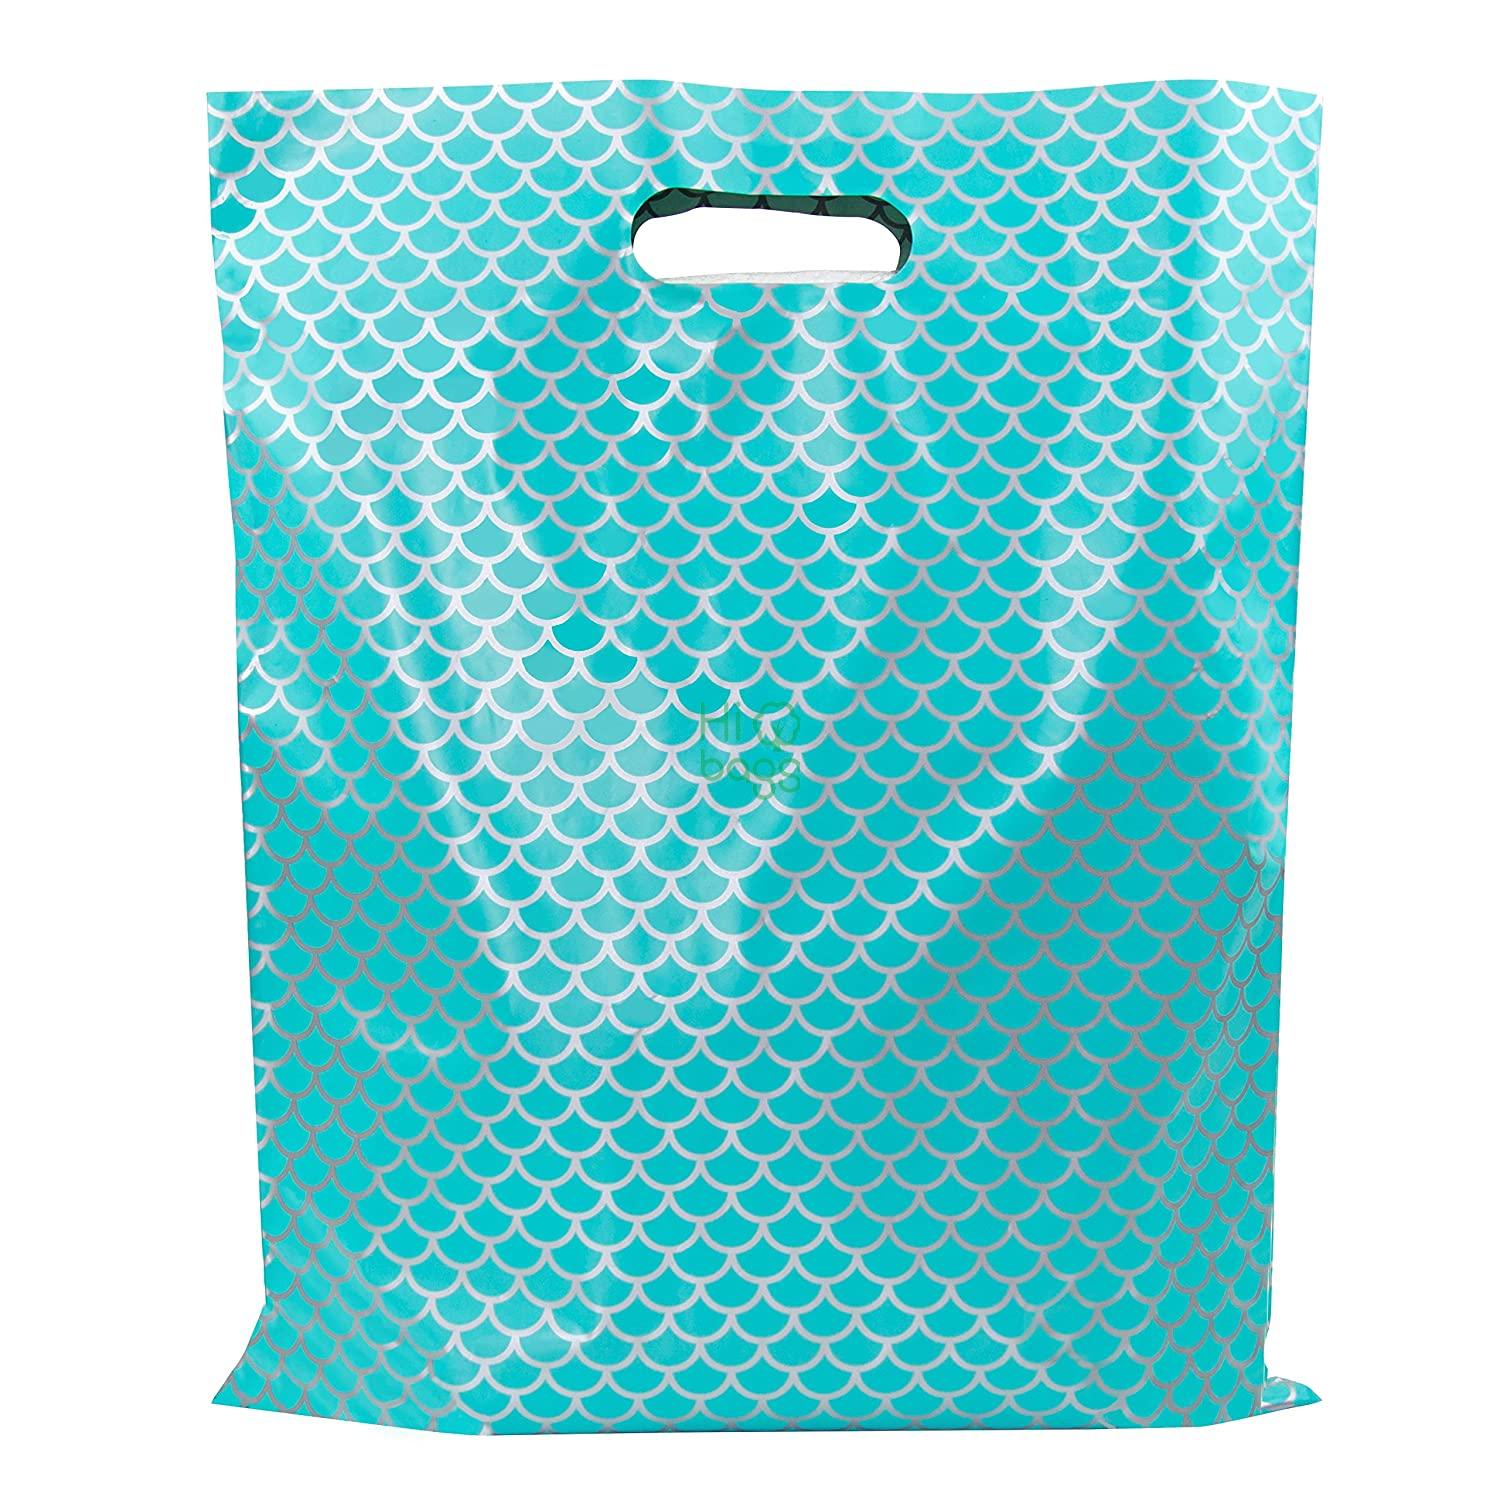 Merchandise Glossy Plastic Boutique Shopping Bags M